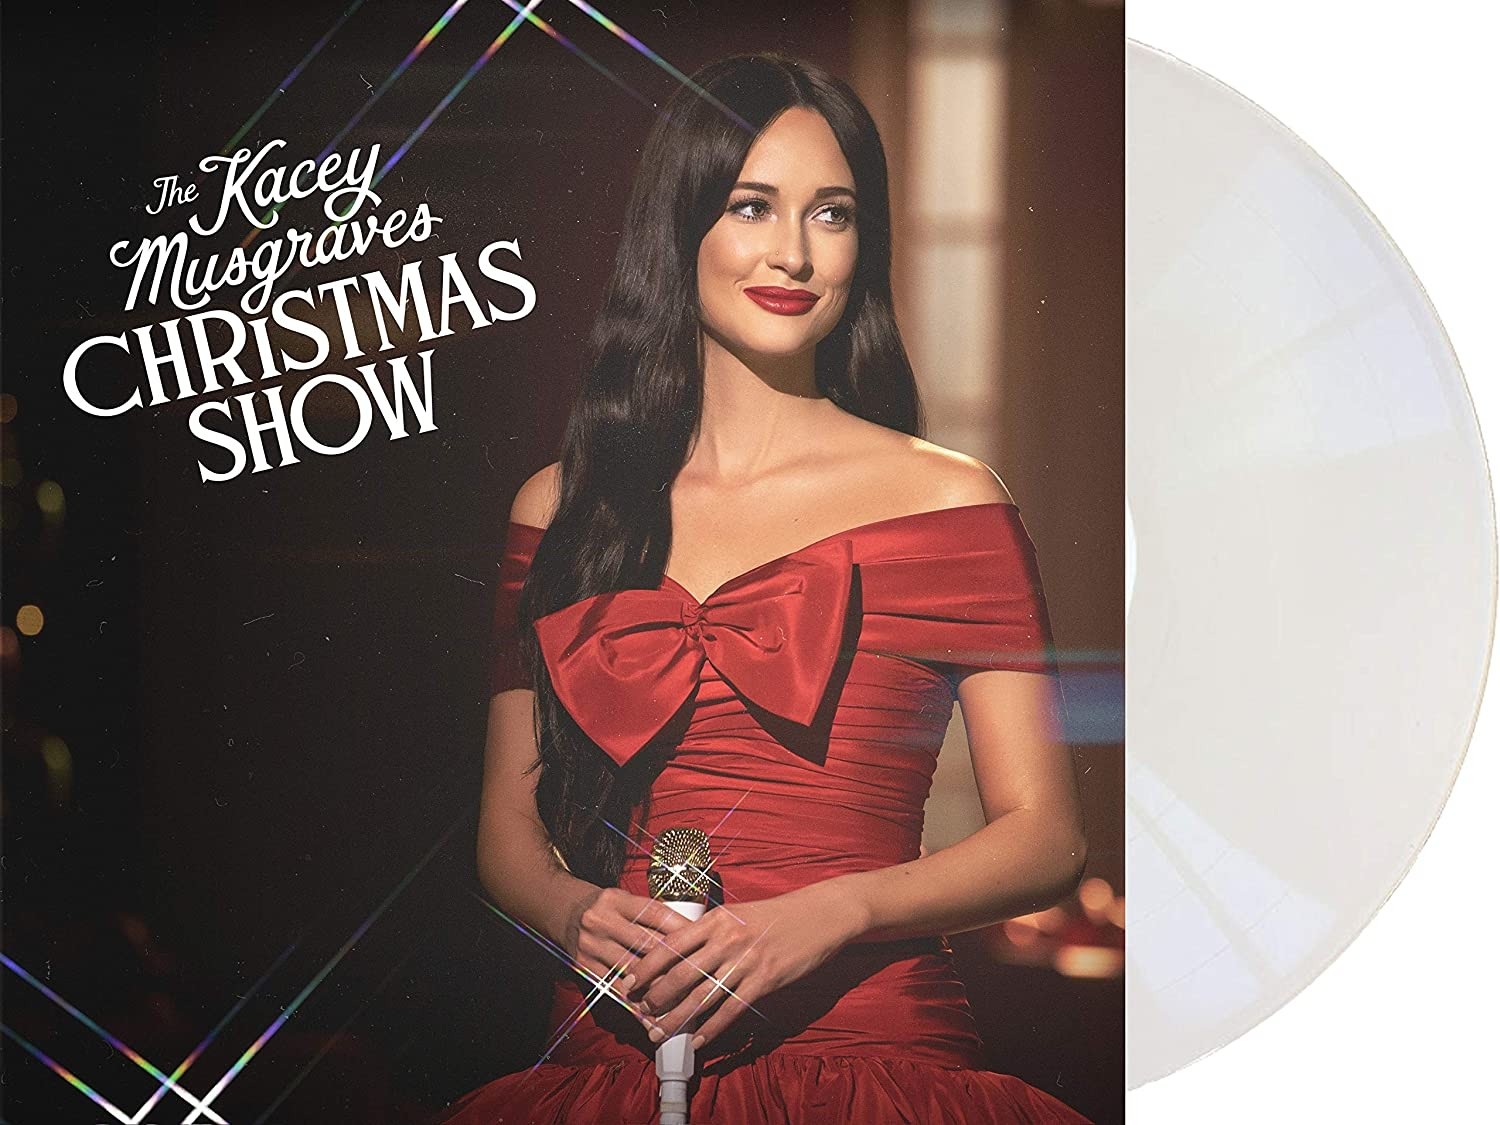 Kacey Musgraves - The Kacey Musgraves Christmas Show (White) Vinyl LP